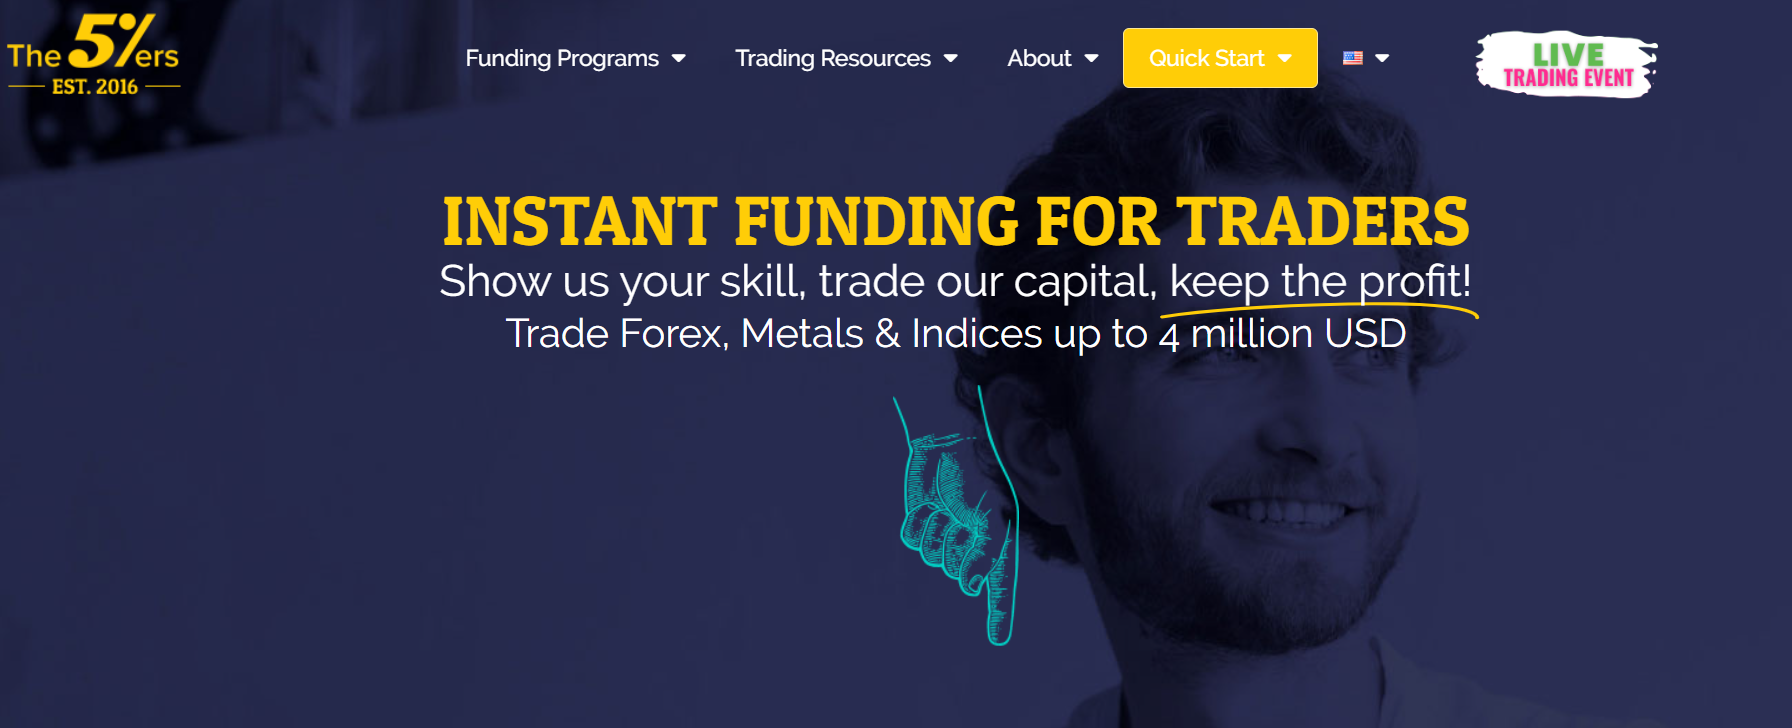 Image: Step by step guide how to become a funded trader on The5ers